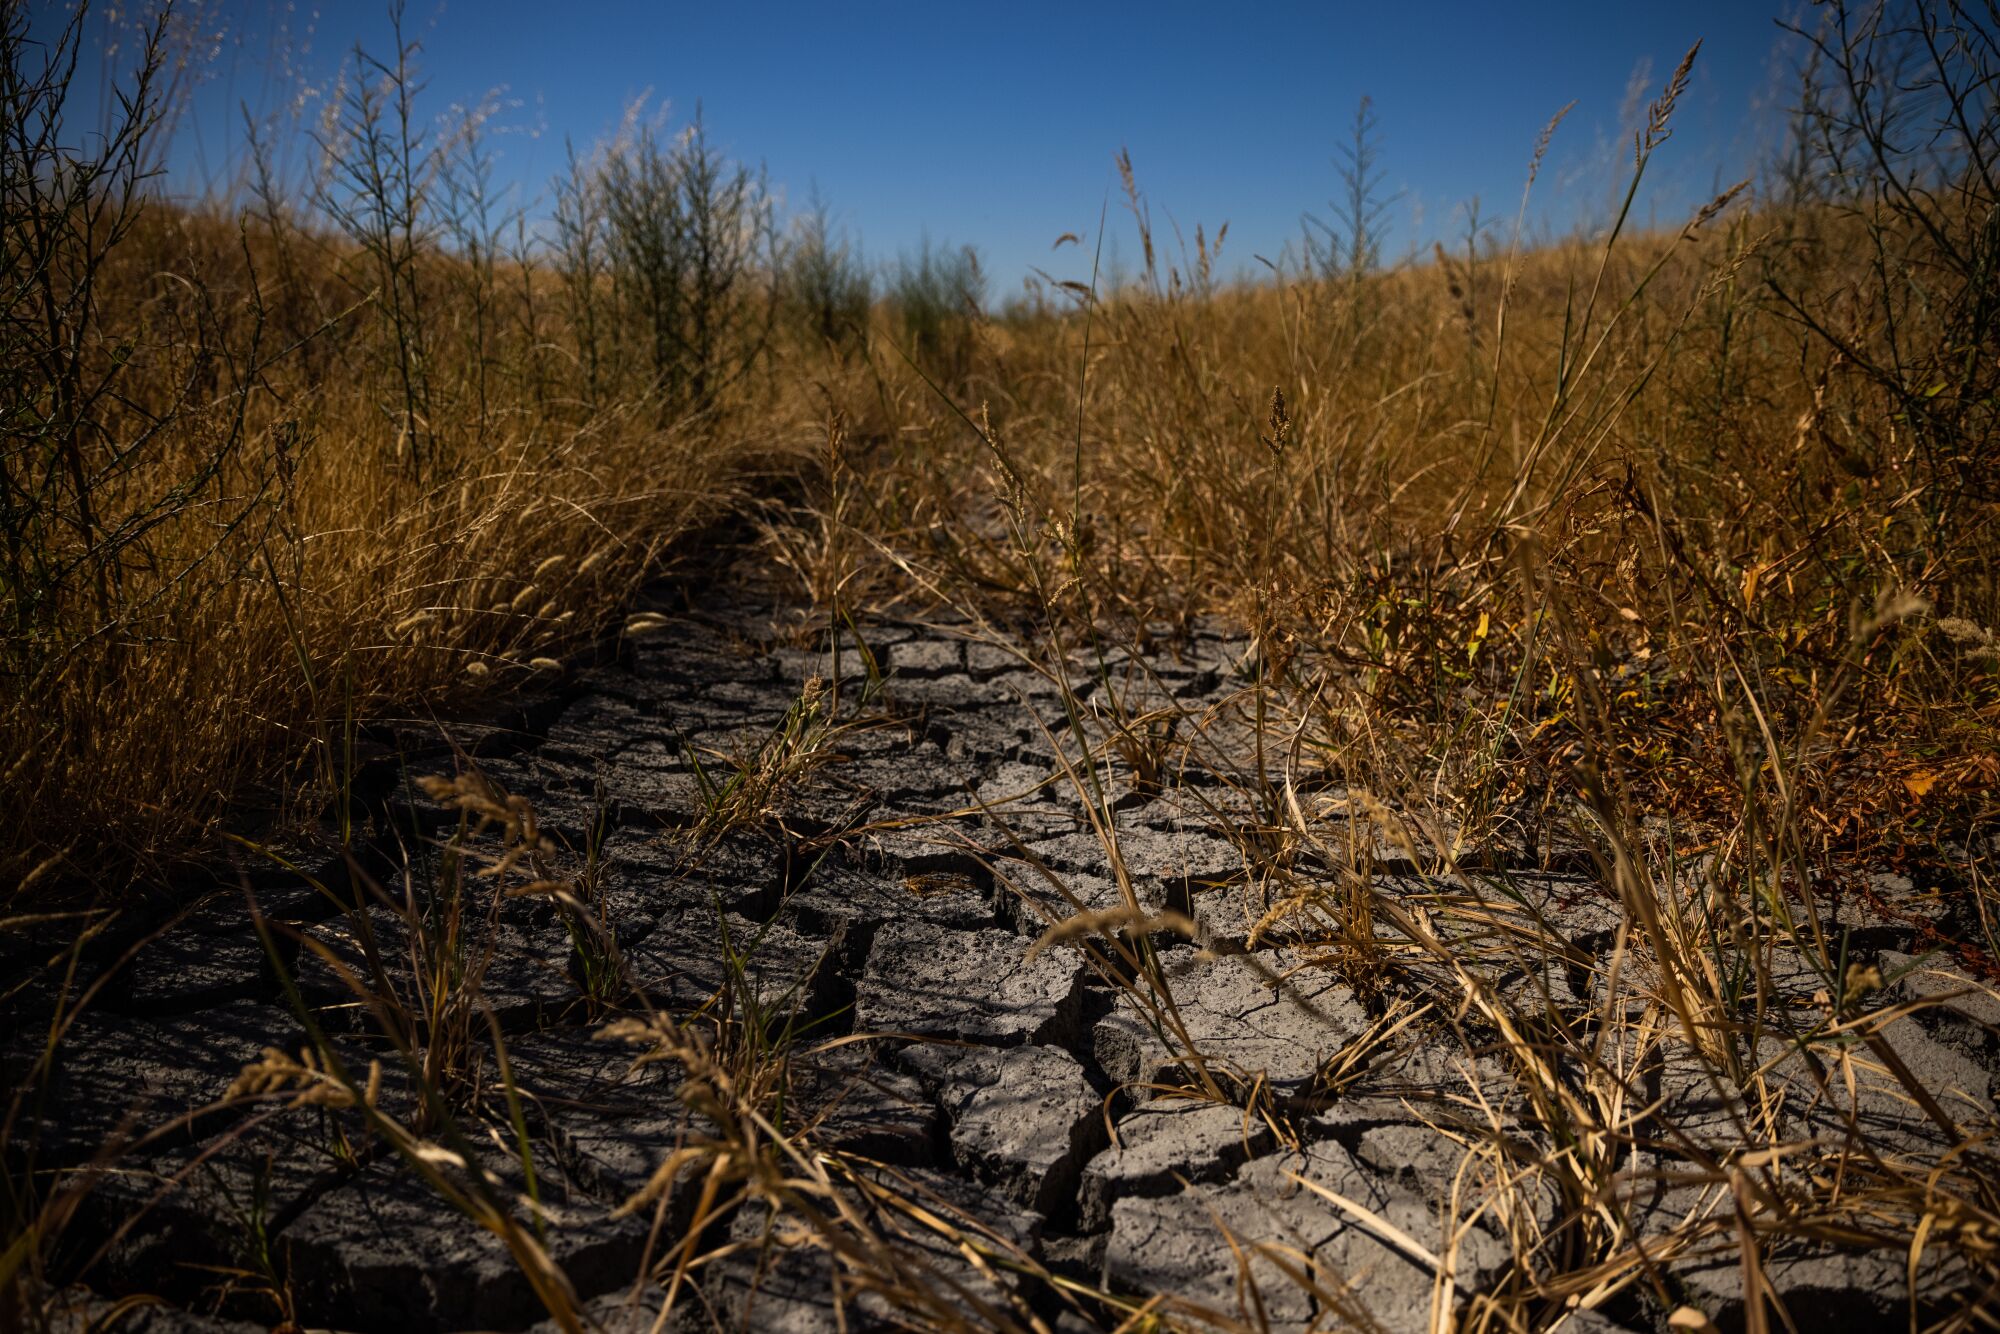 Brown plant stalks rise from cracked dry earth.